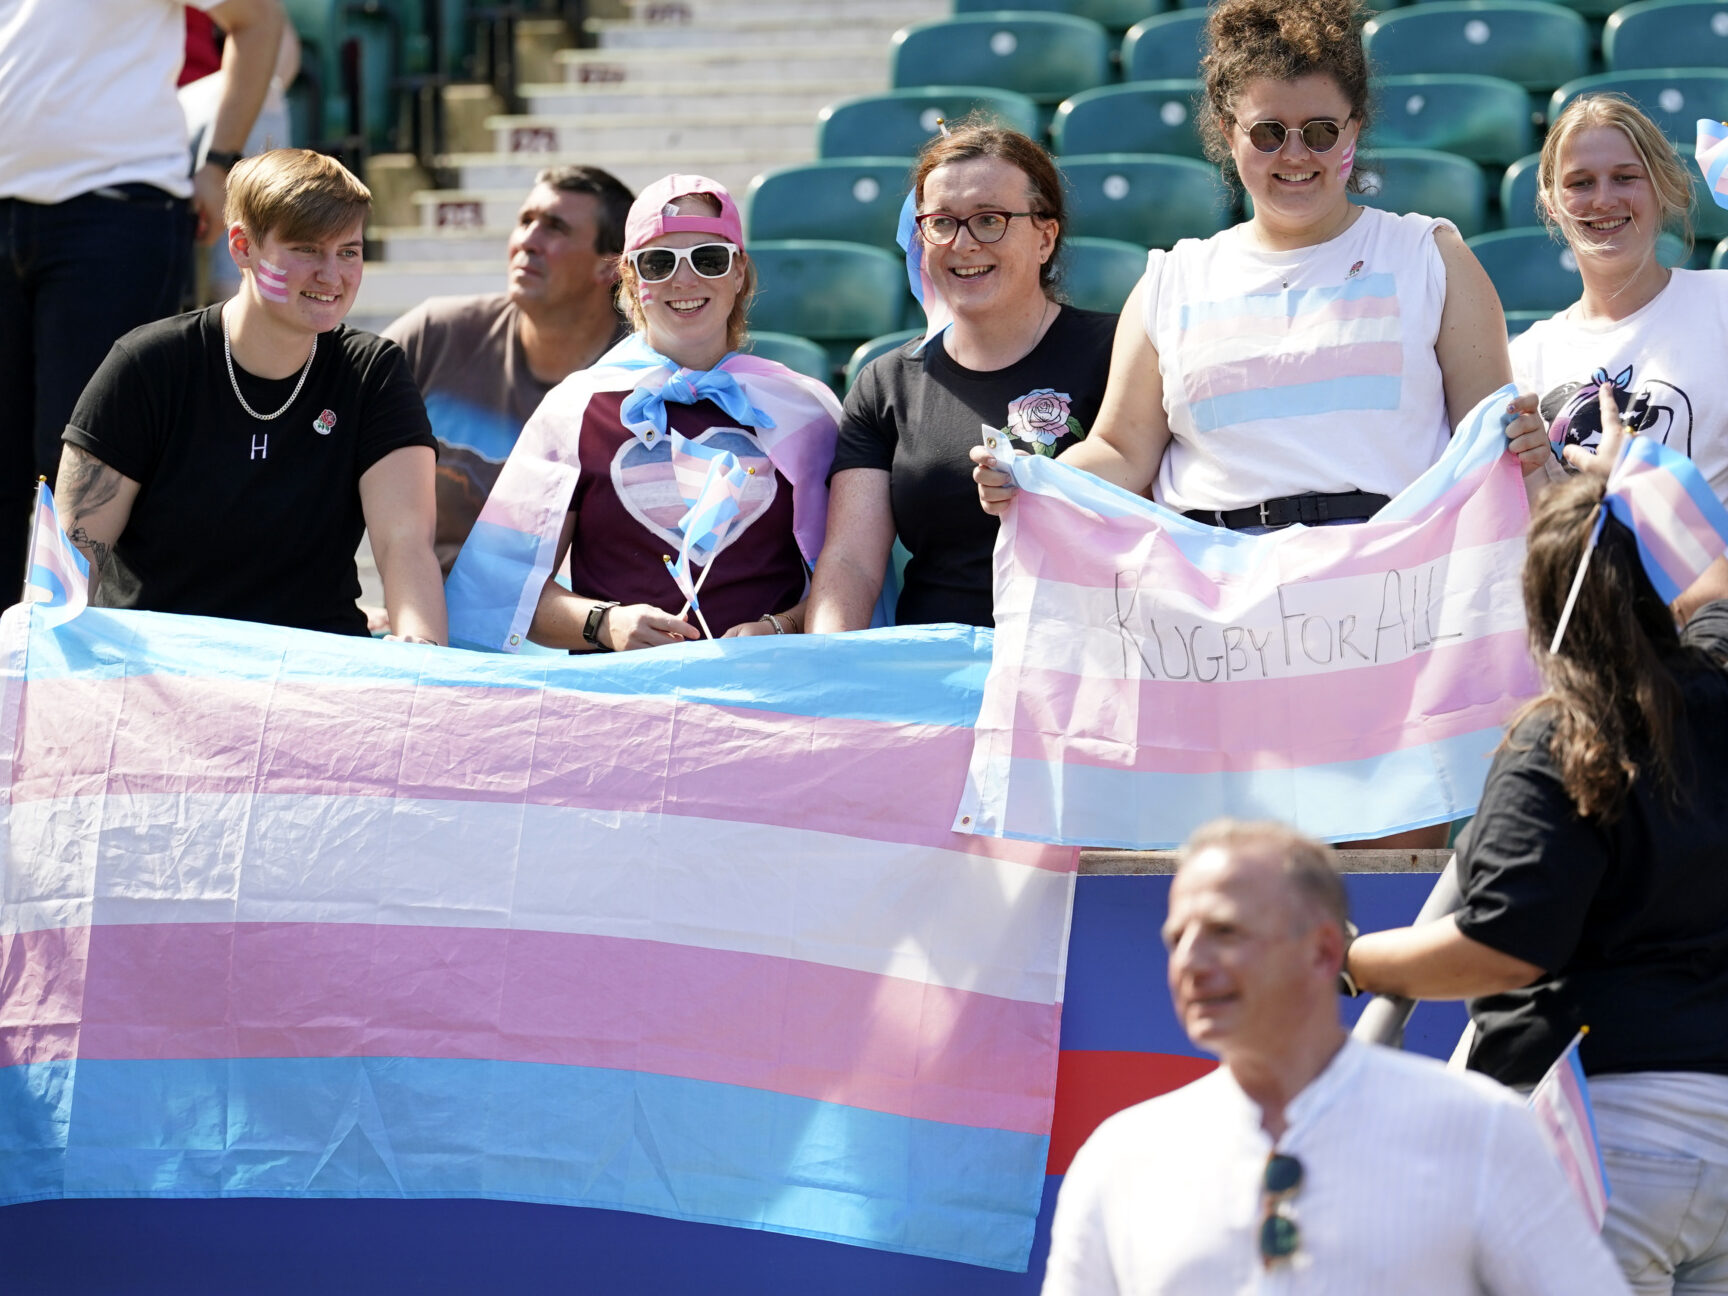 England fans with Transgender Pride flags in the stands after an open training session at Twickenham Stadium, London. Picture date: Thursday August 11, 2022. (Photo by Andrew Matthews/PA Images via Getty Images)